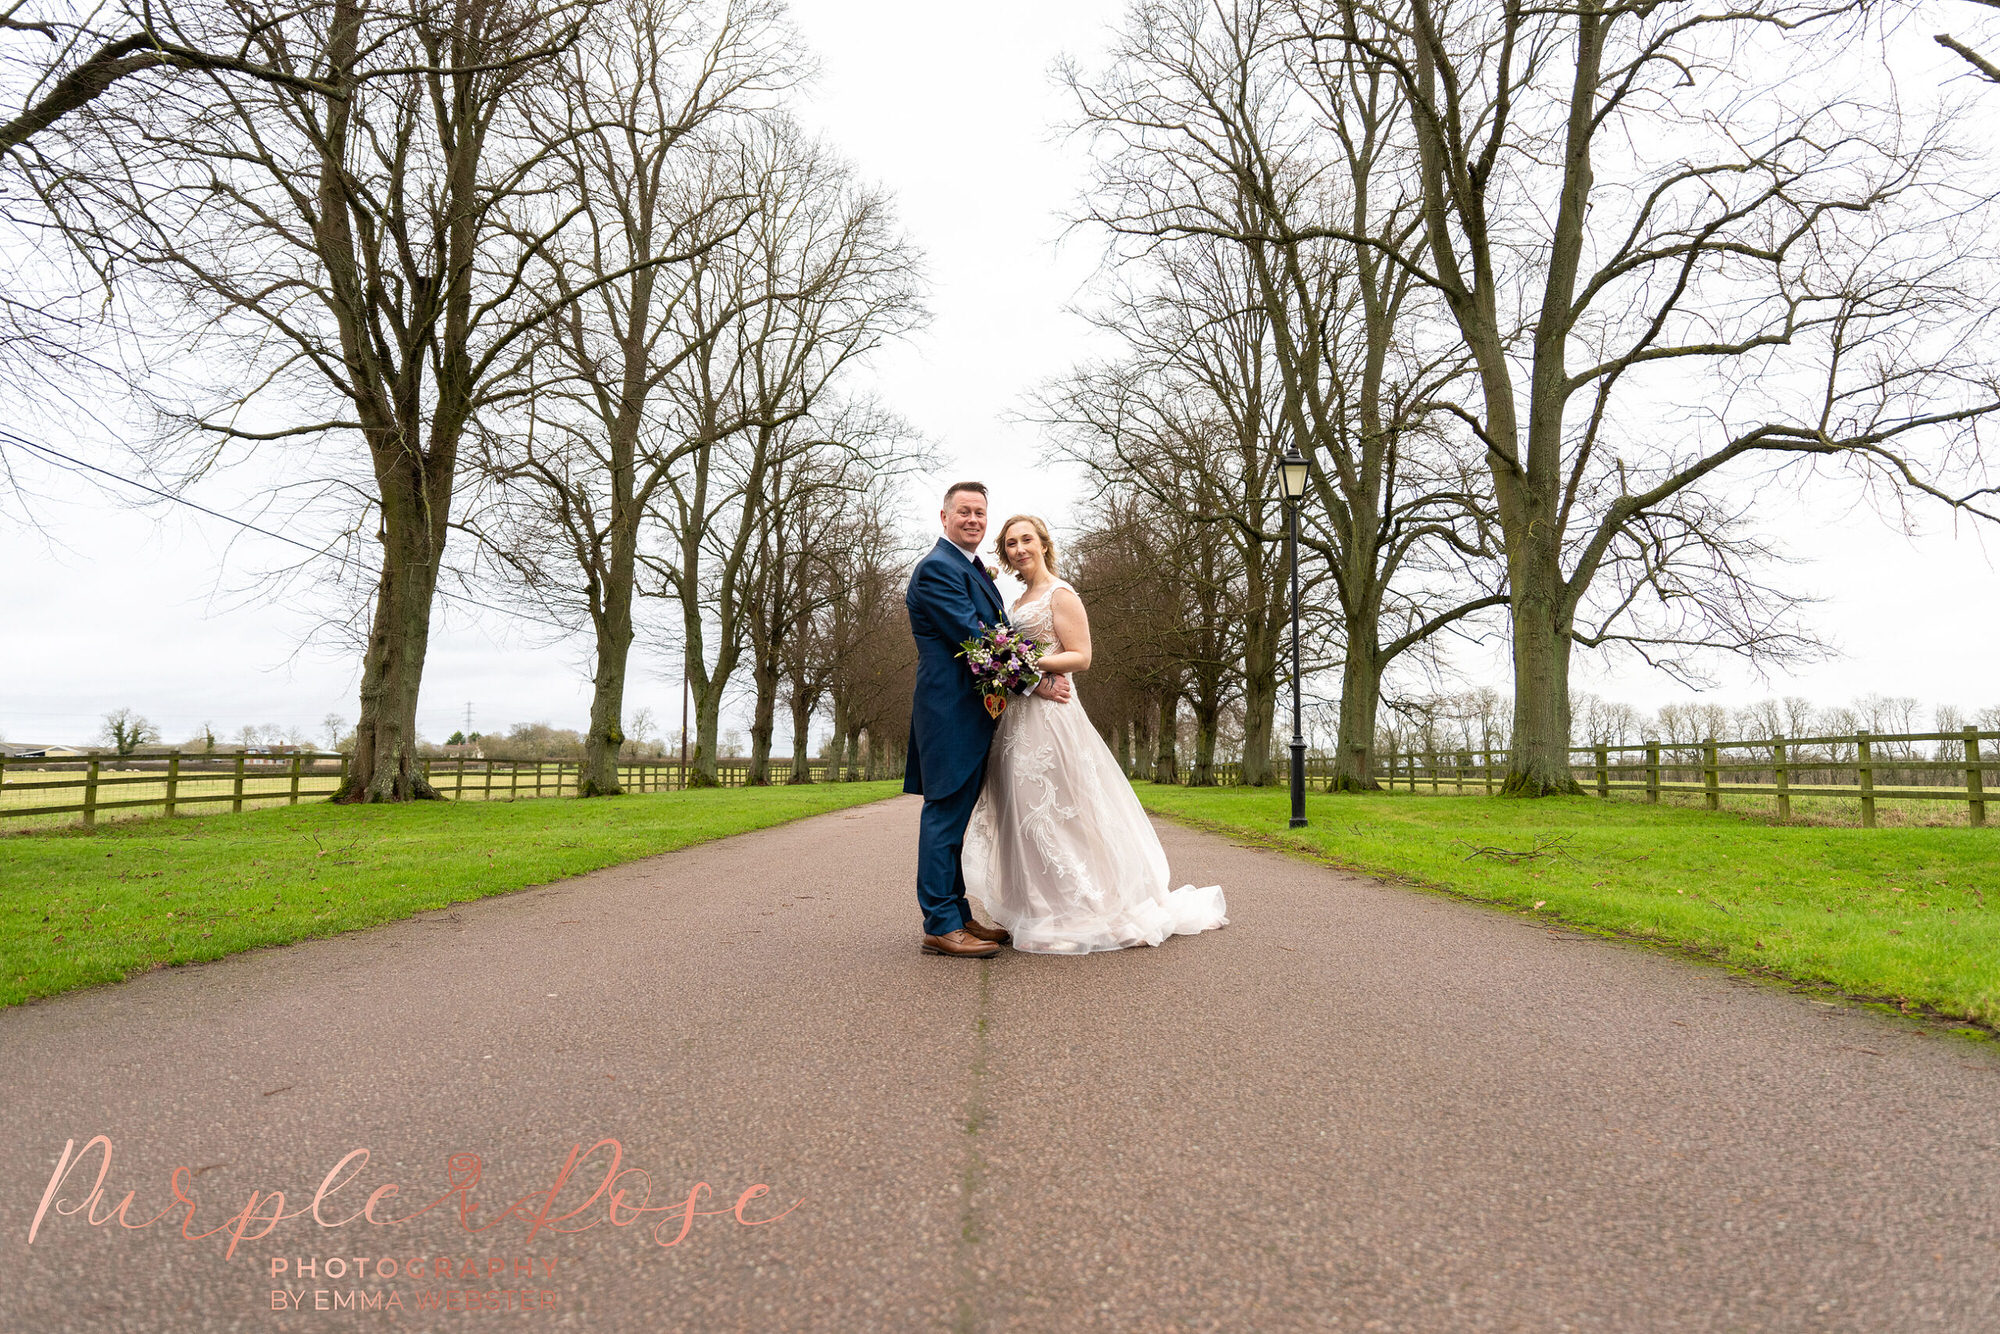 Bride and groom stood on tree lined driveway